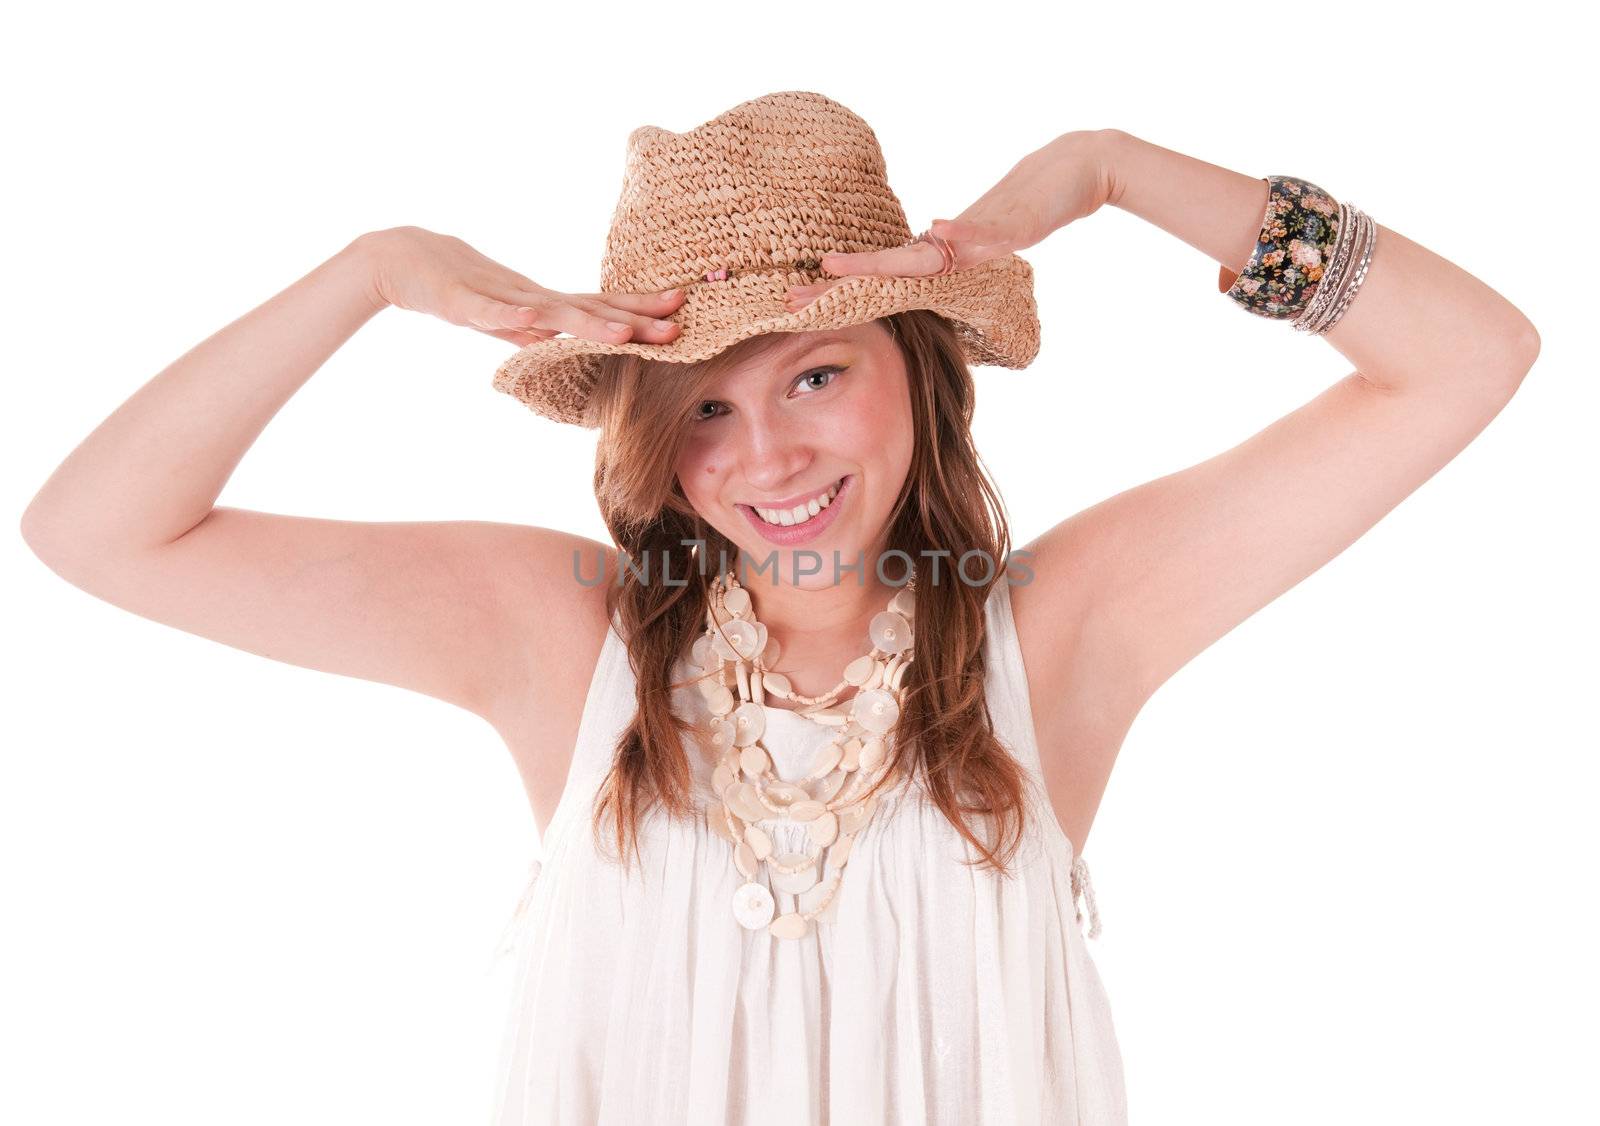 Smiling girl in Straw hat portrait isolated on white background